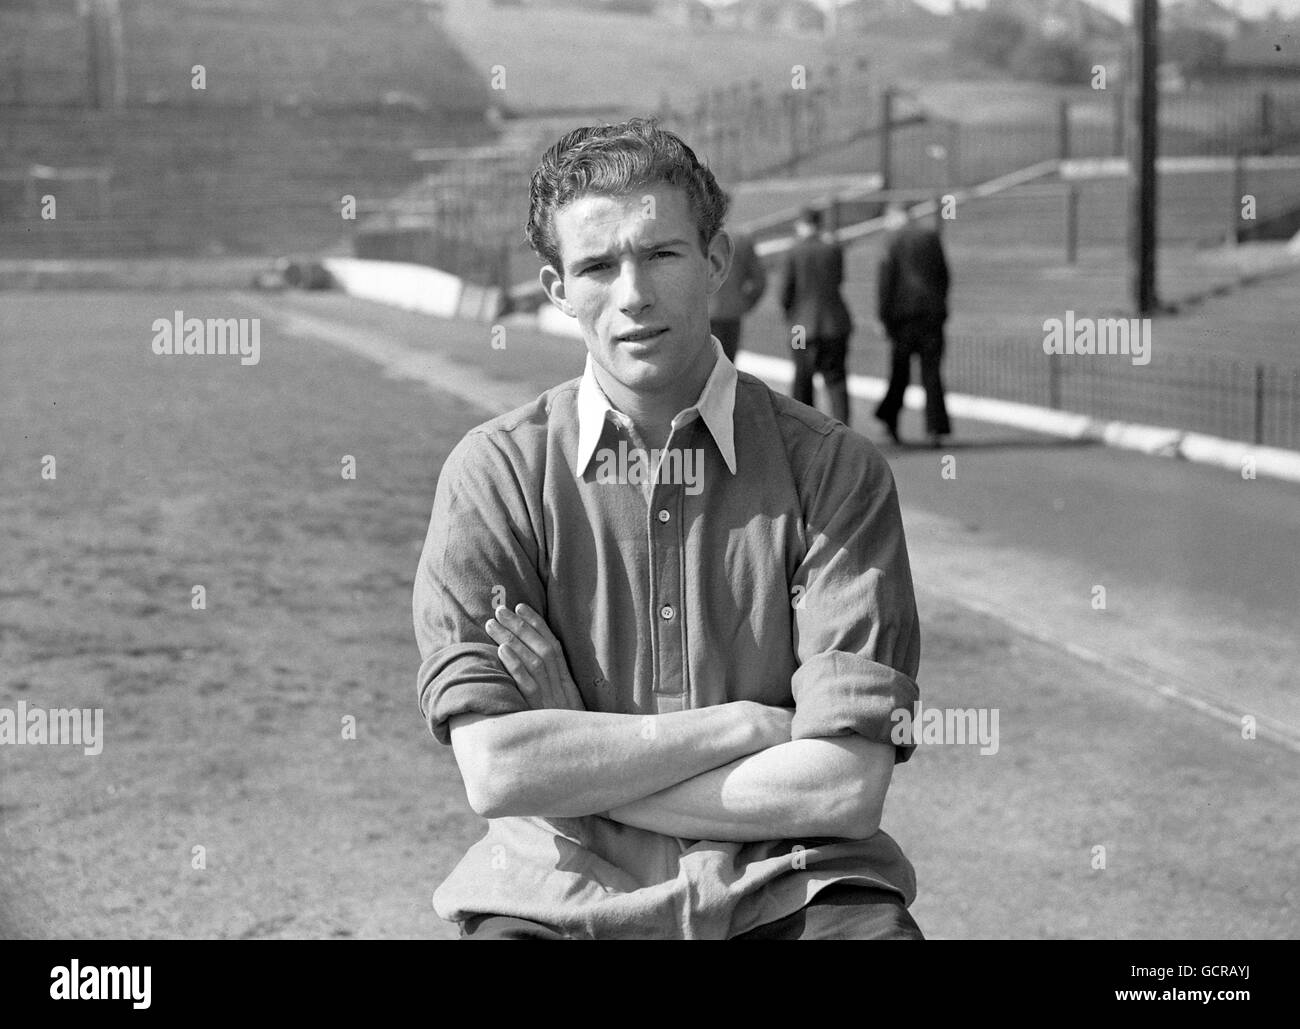 Soccer - League Division Two - Charlton FC - Tour of Turkey Photocall - The Valley. Malcolm Allison, Charlton FC Stock Photo